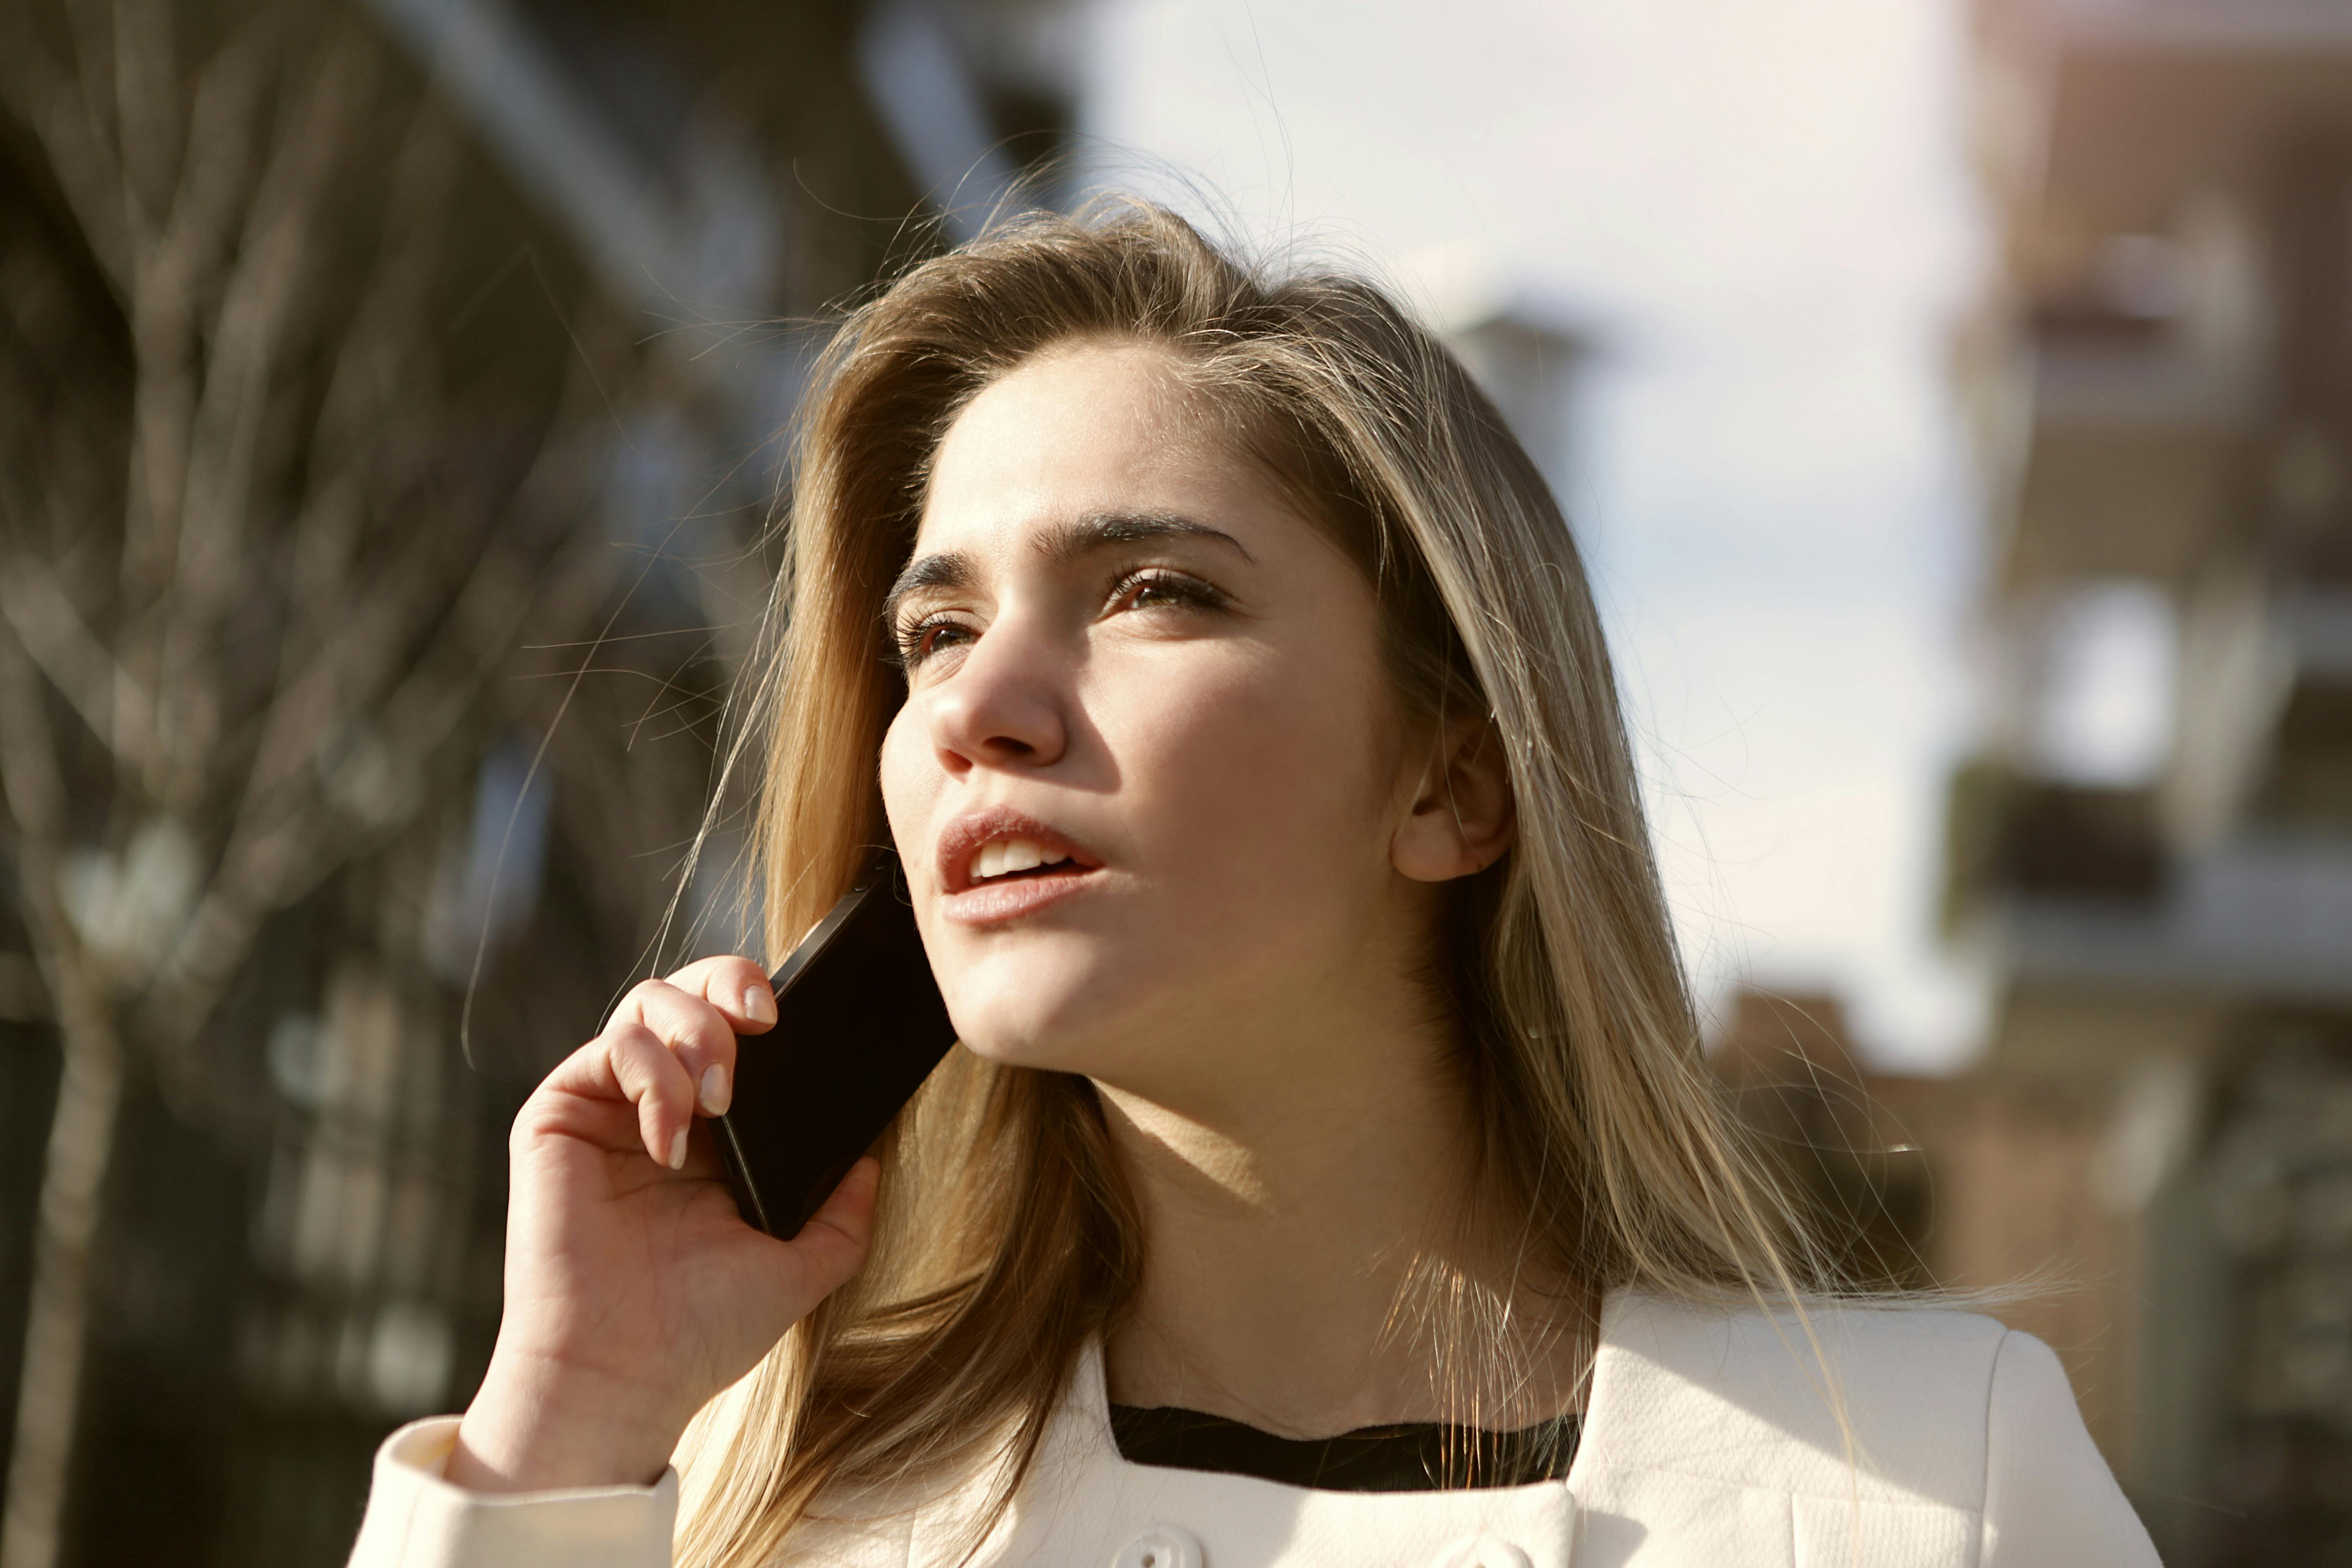 A confused-looking woman talking on the phone | Source: Pexels